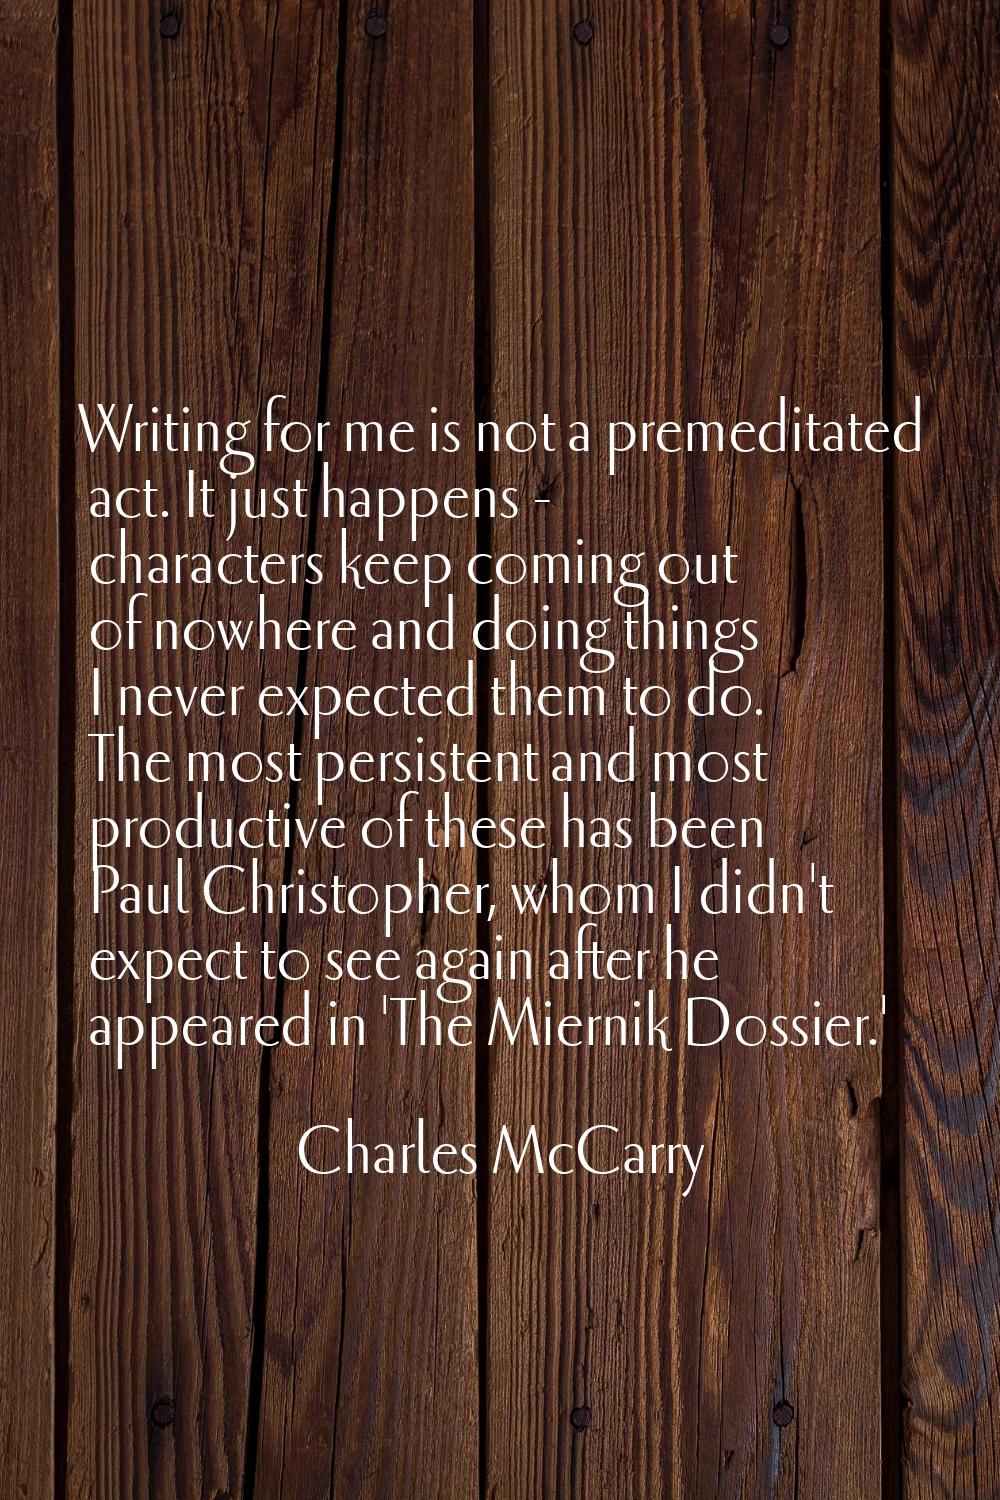 Writing for me is not a premeditated act. It just happens - characters keep coming out of nowhere a